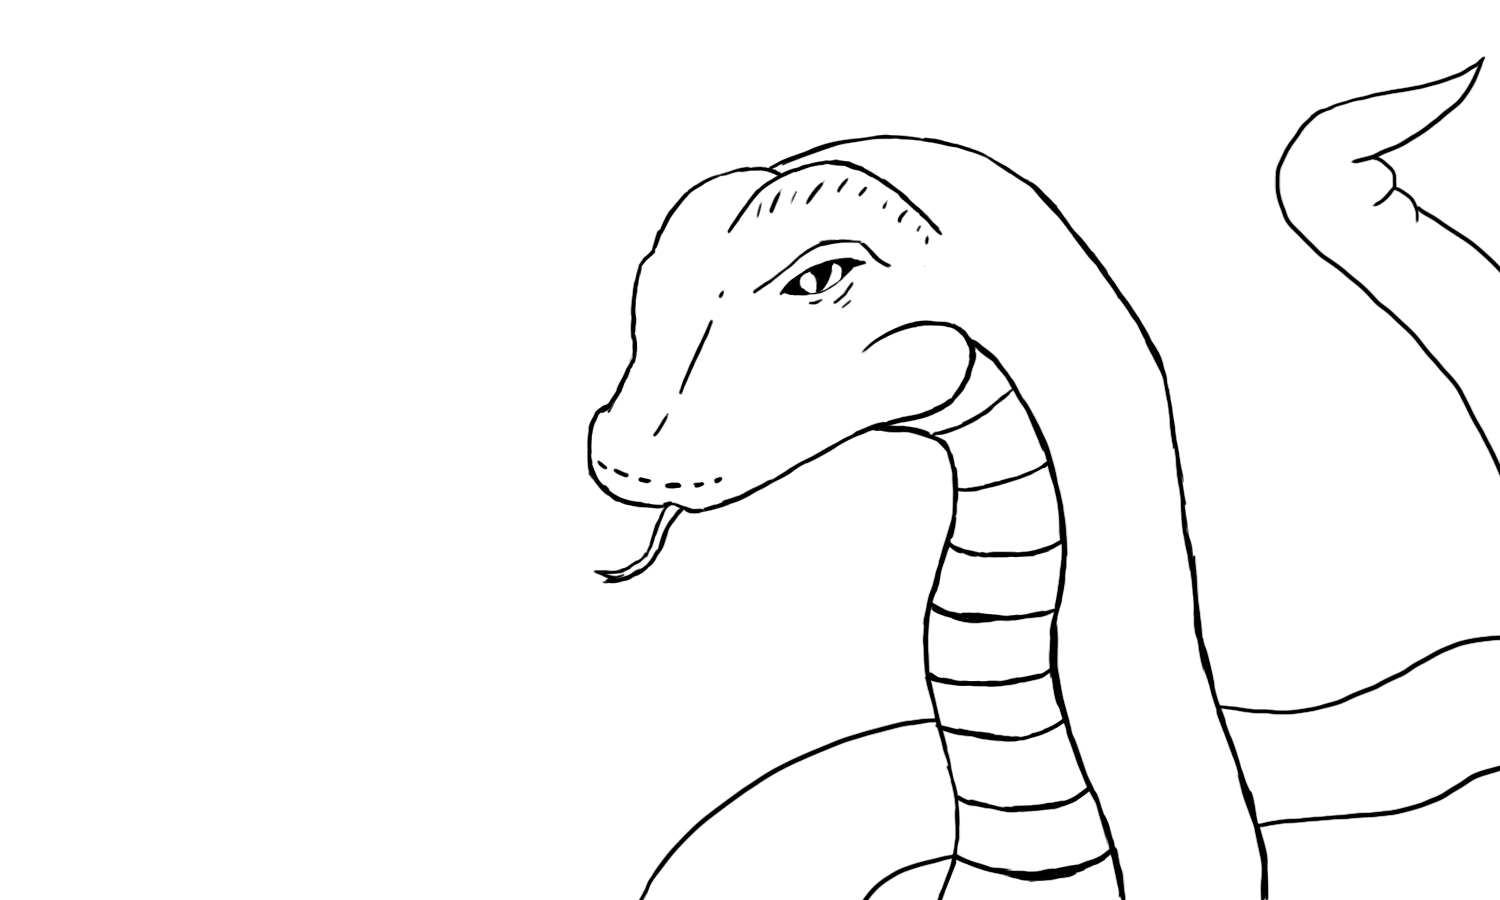 Snake Drawing 17389 Hd Wallpapers in Animals - Imagesci.com